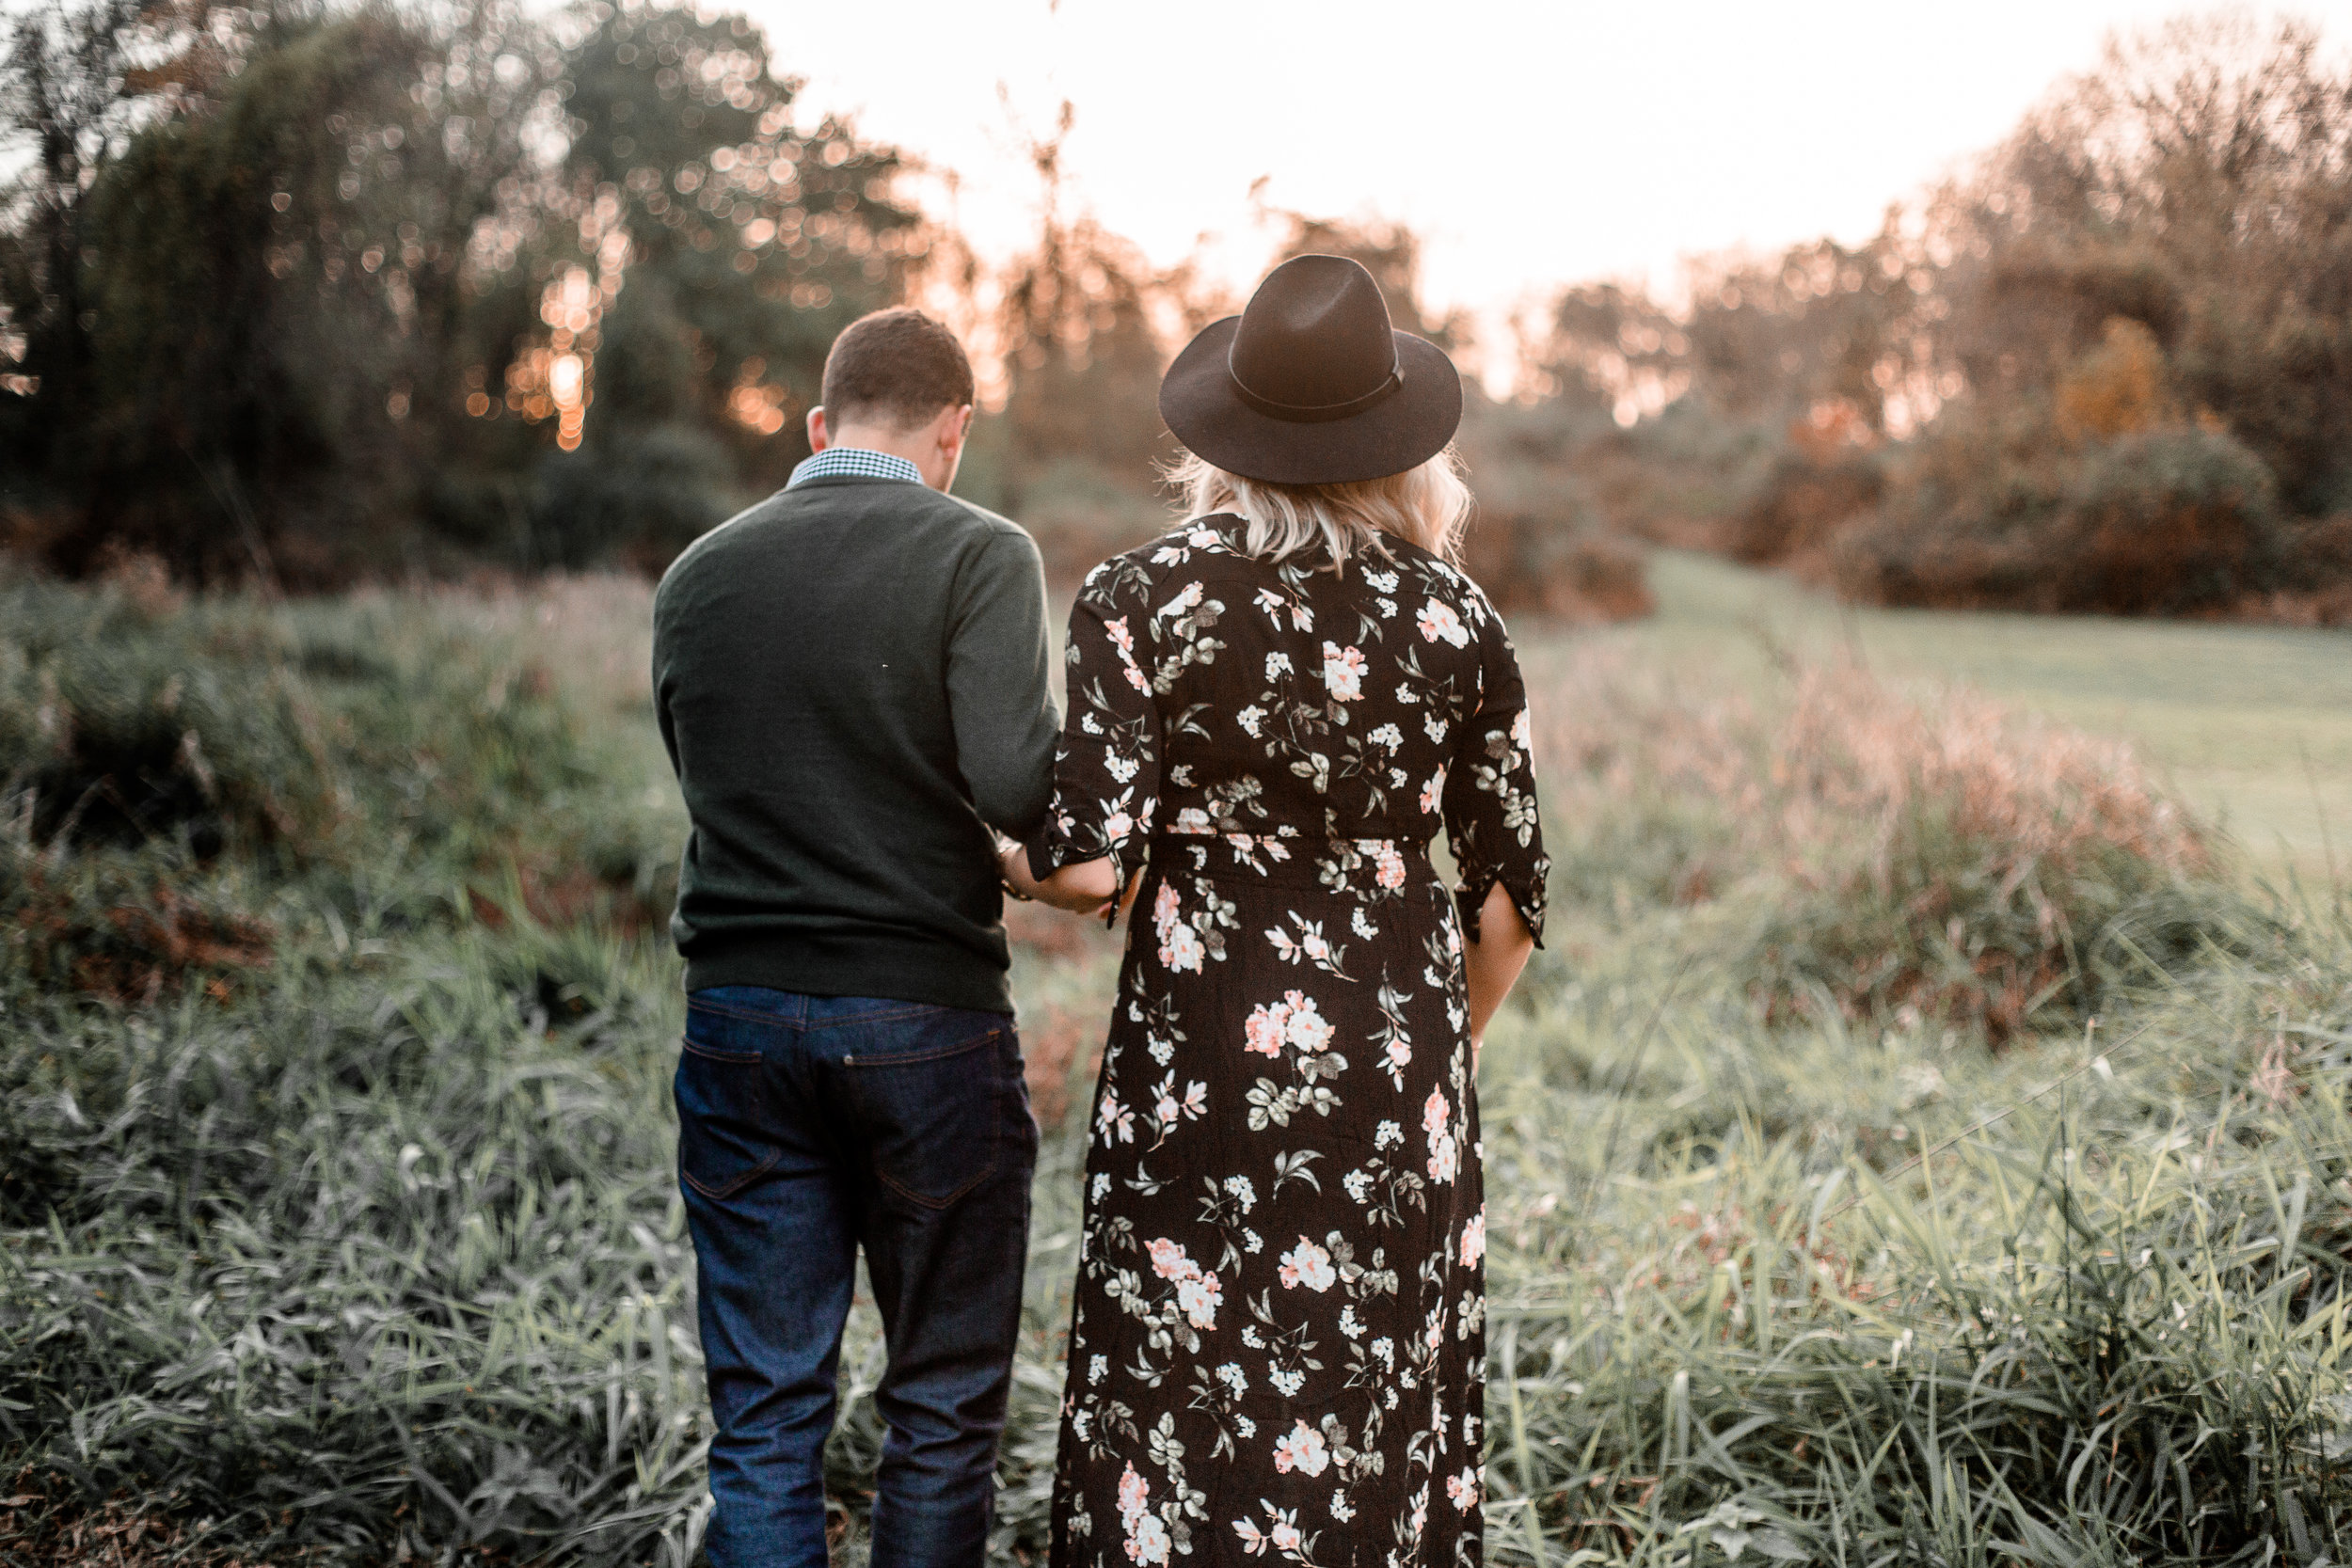 nicole-daacke-photography-carefree-bohemian-lancaster-pa-pennsylvania-engagement-photos-engagement-session-golden-sunset-adventure-session-in-lancaster-pa-lancaster-pa-outdoor-wedding-photographer-31.jpg